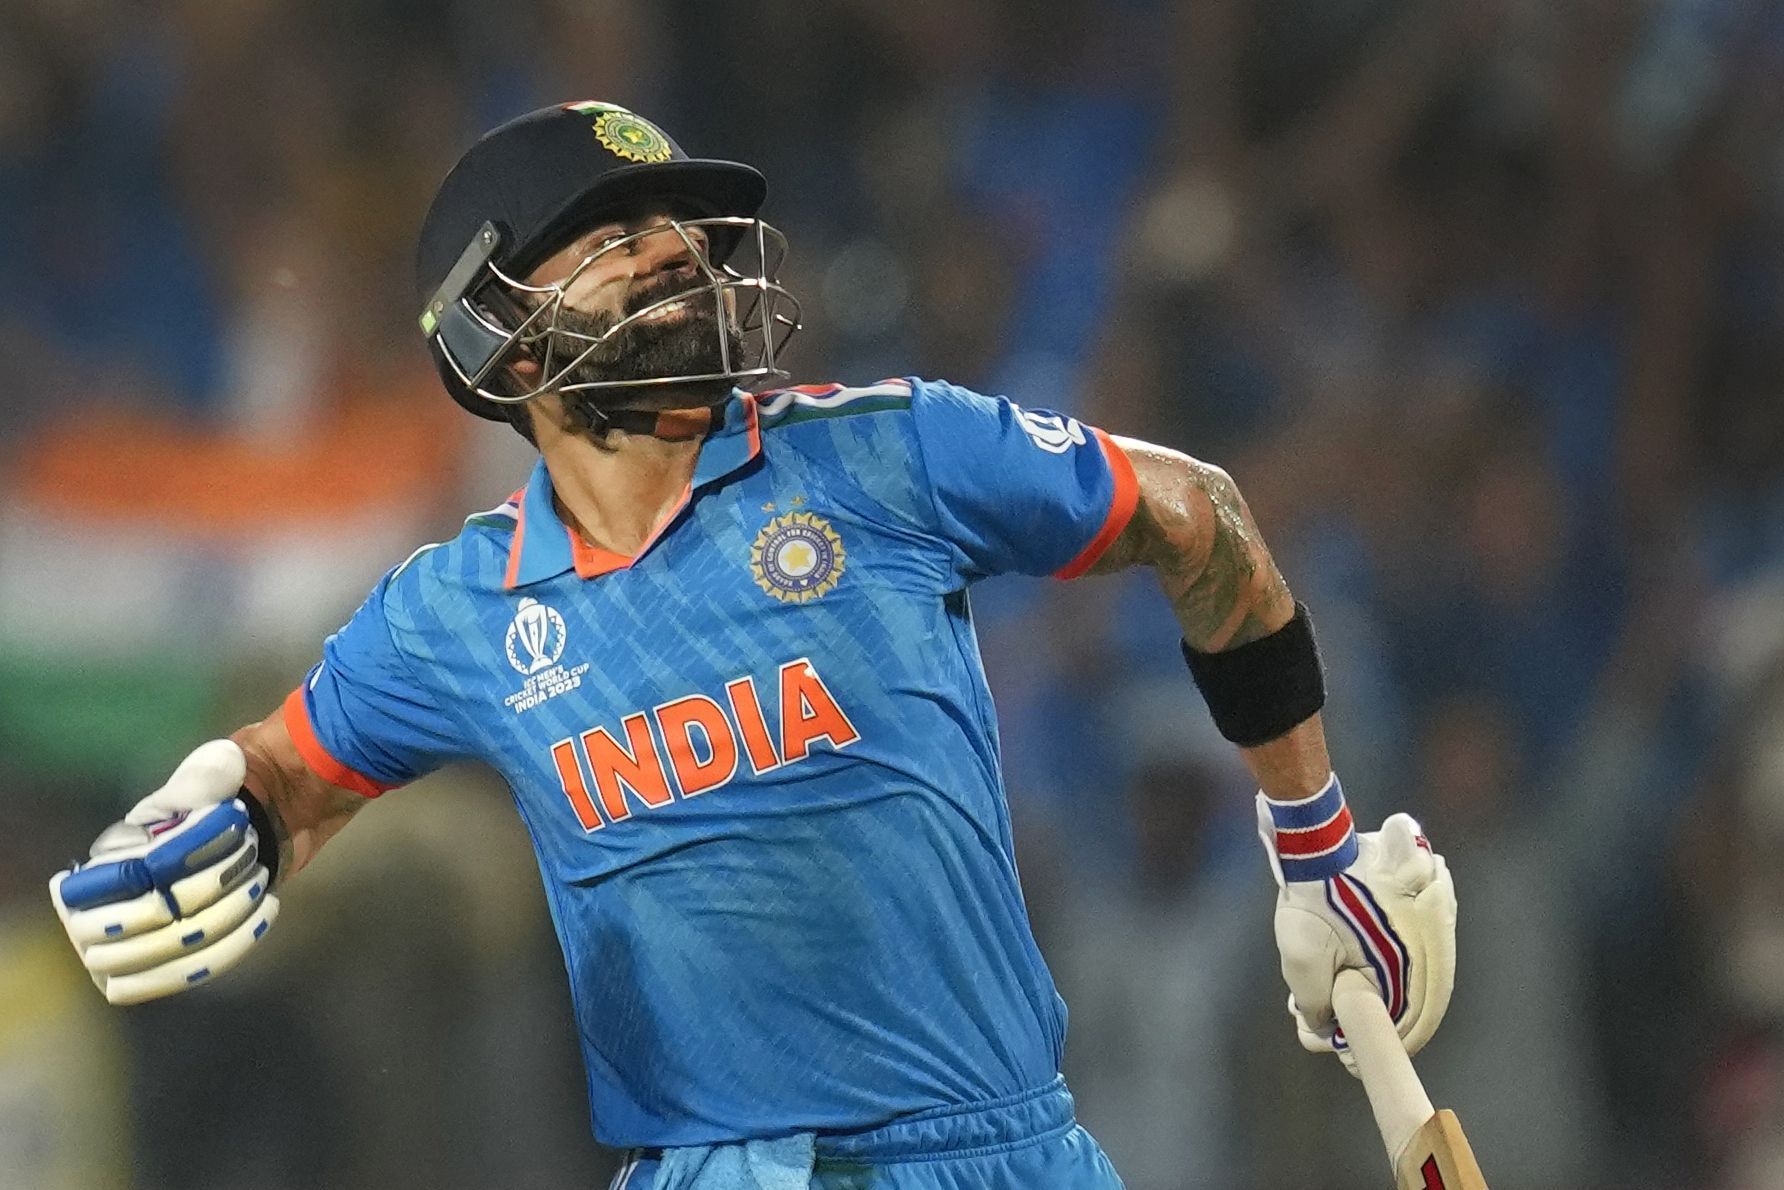 Virat Kohli scored a century when 169 were required for a win when he walked out to bat. [P/C: AP]